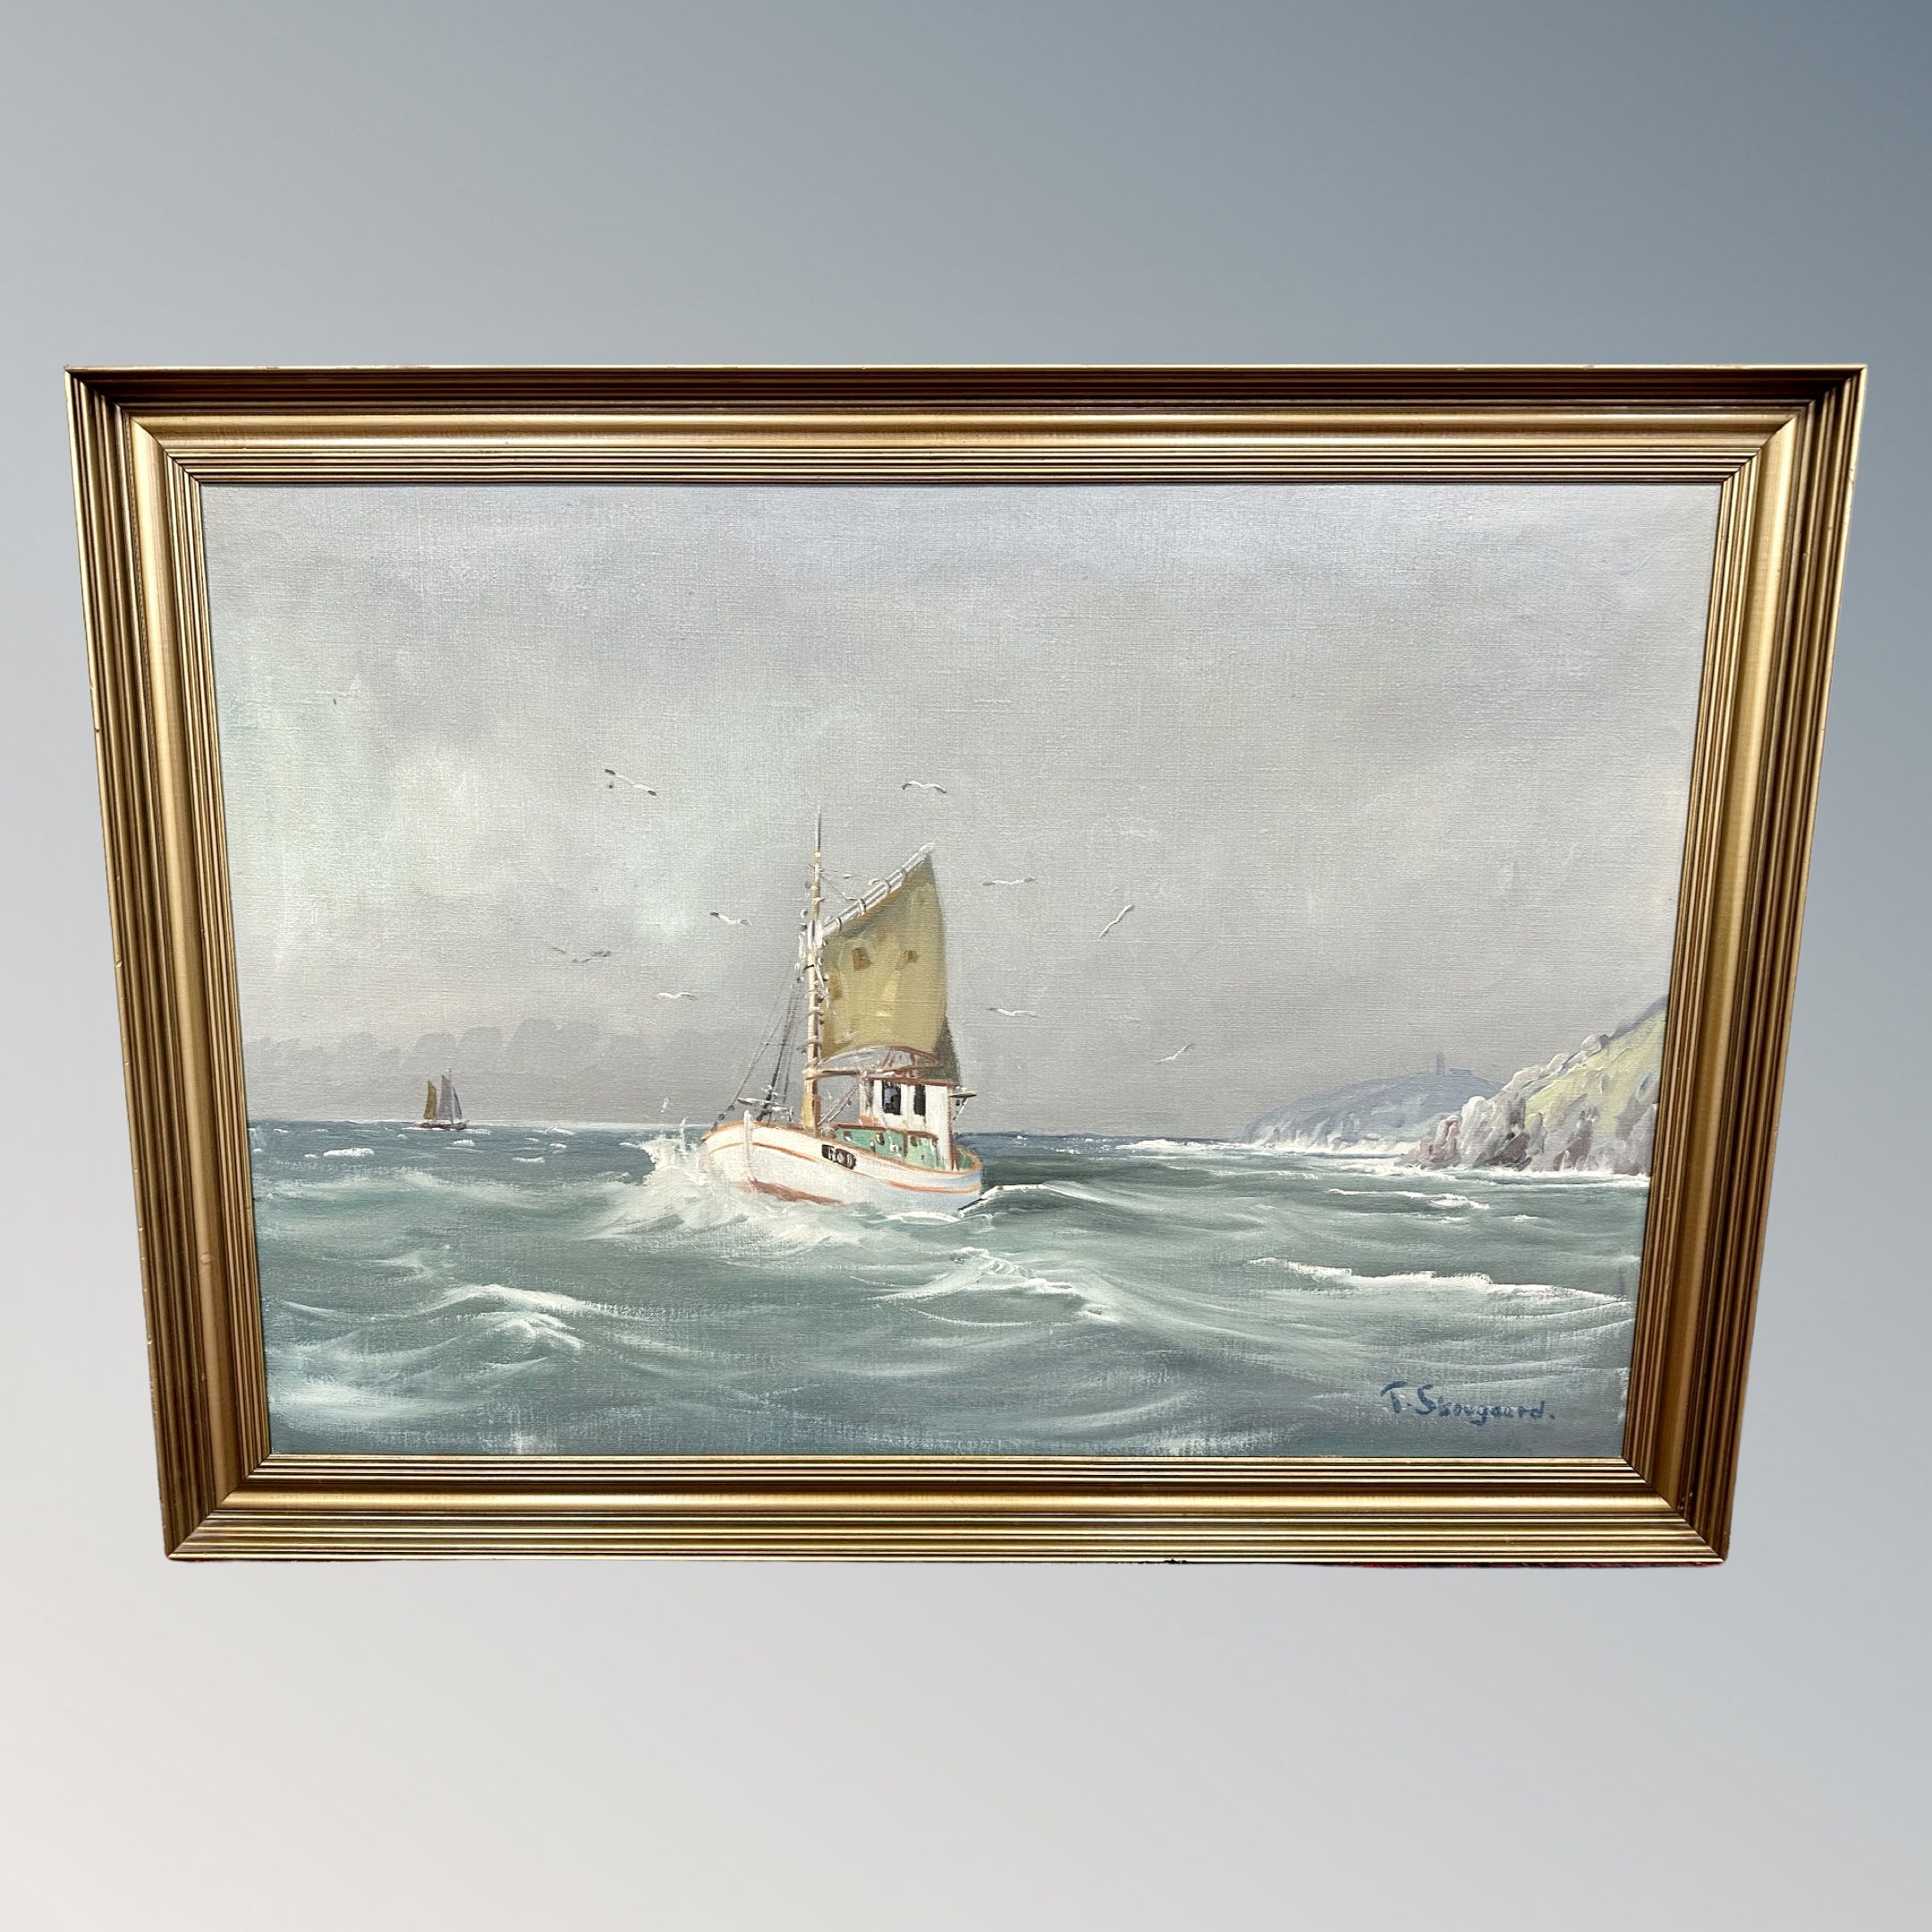 T Skougaard : Fishing boat at sea, oil on canvas,